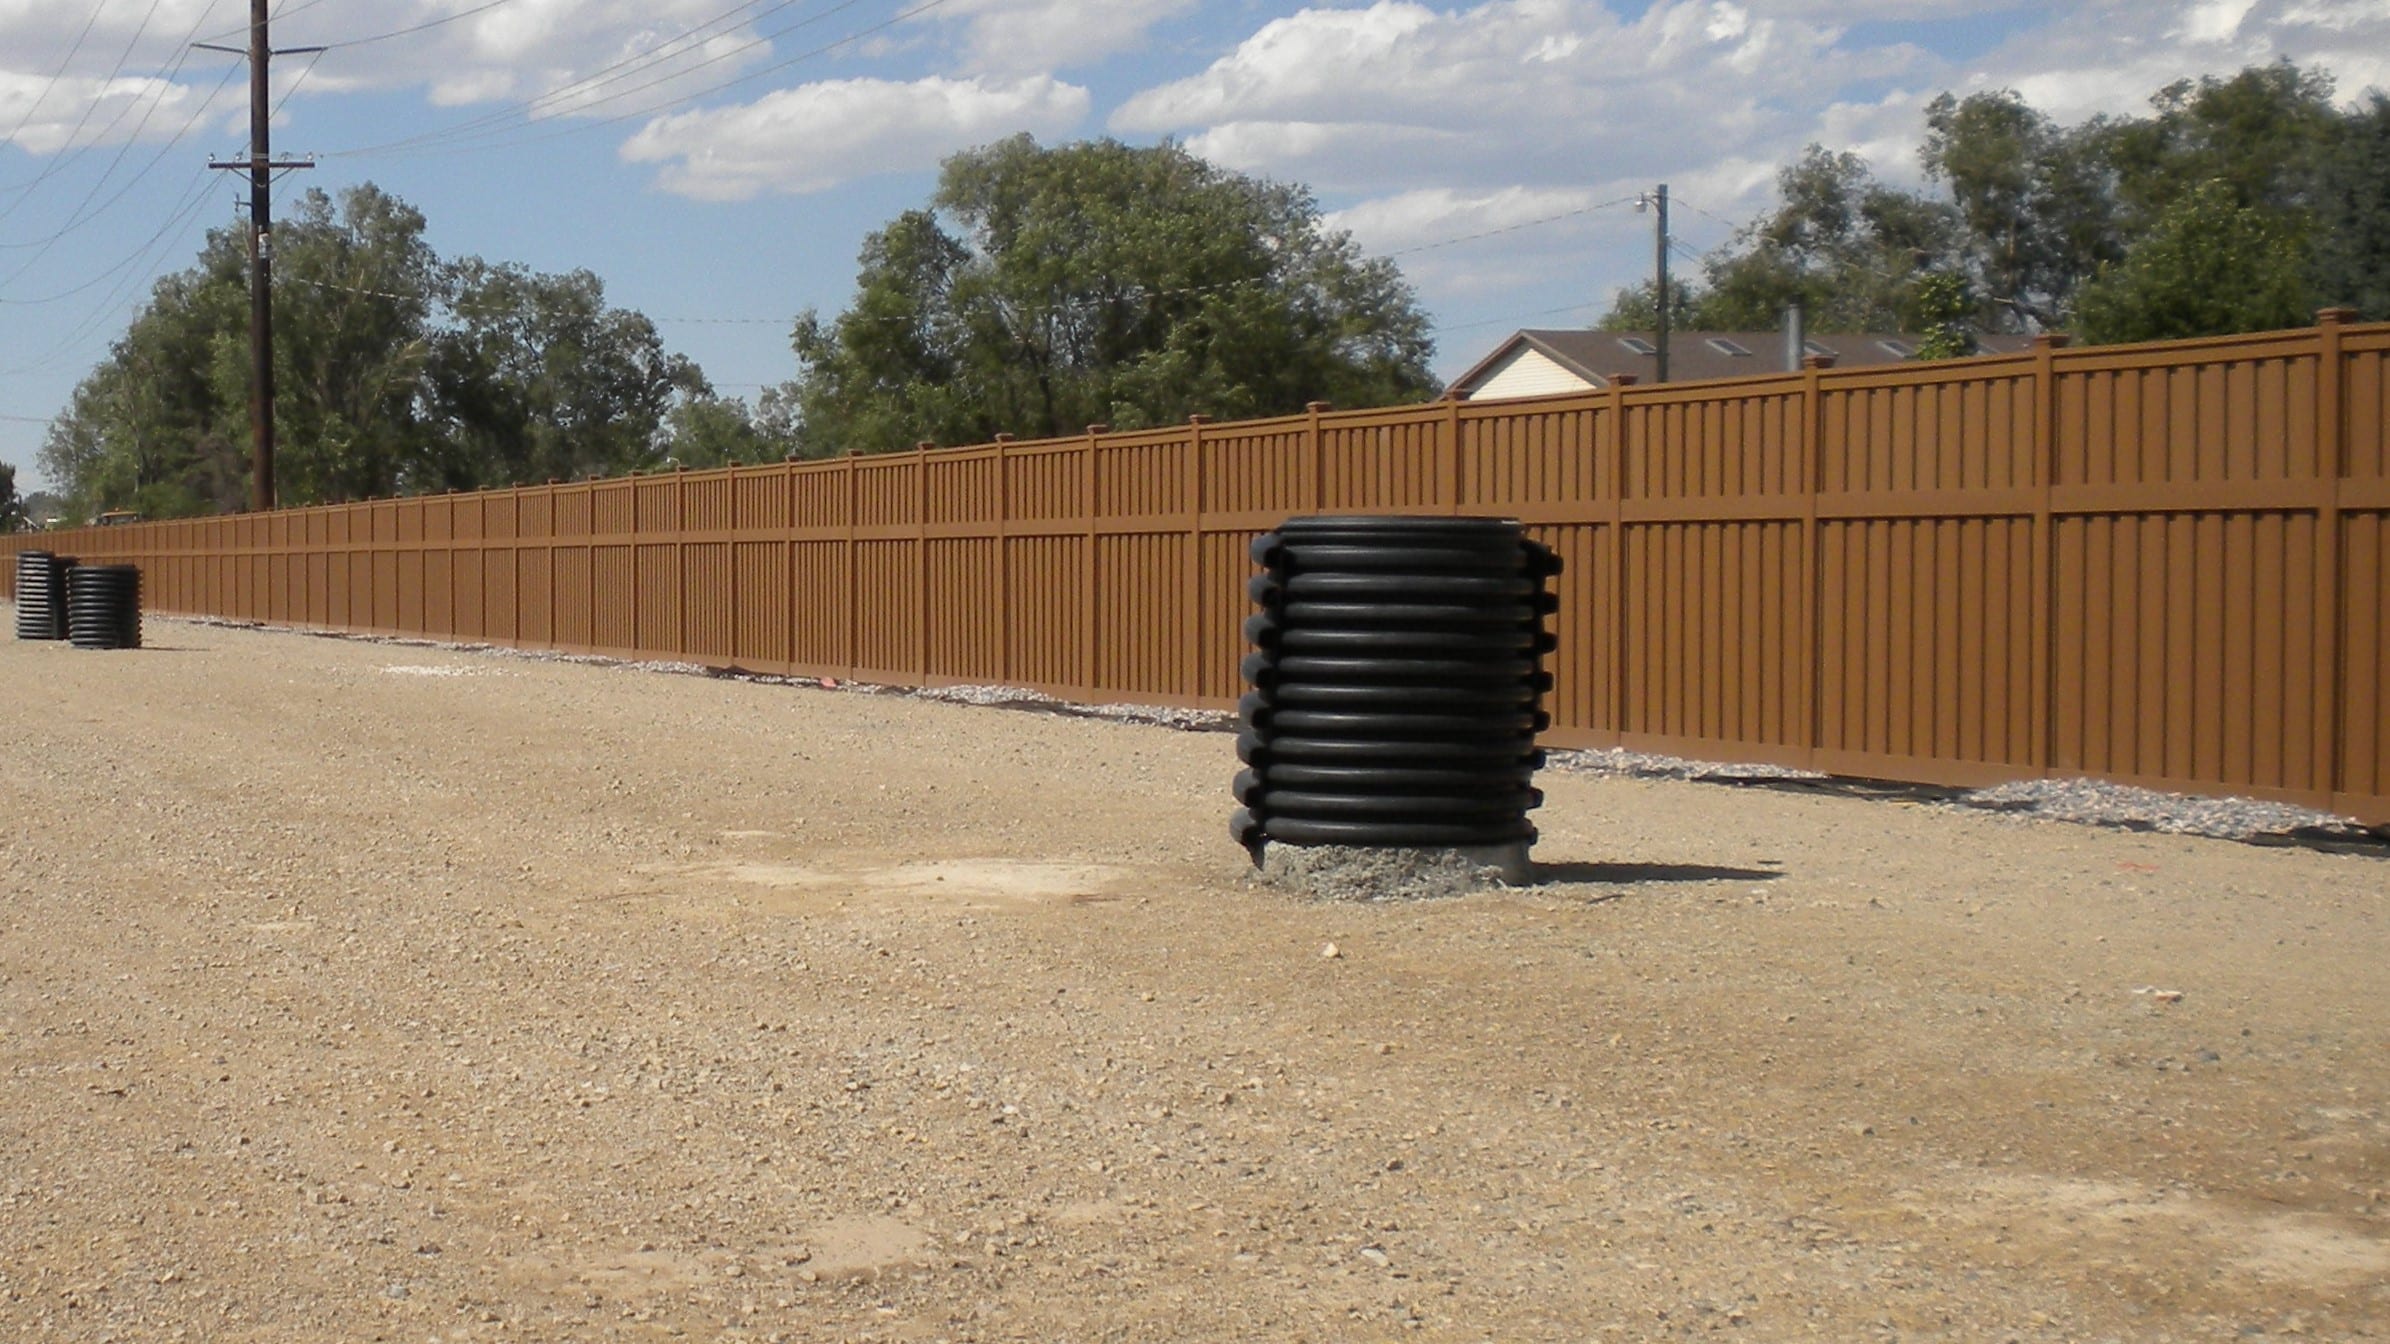 A long perimeter of Trex fencing installed for a government fencing project